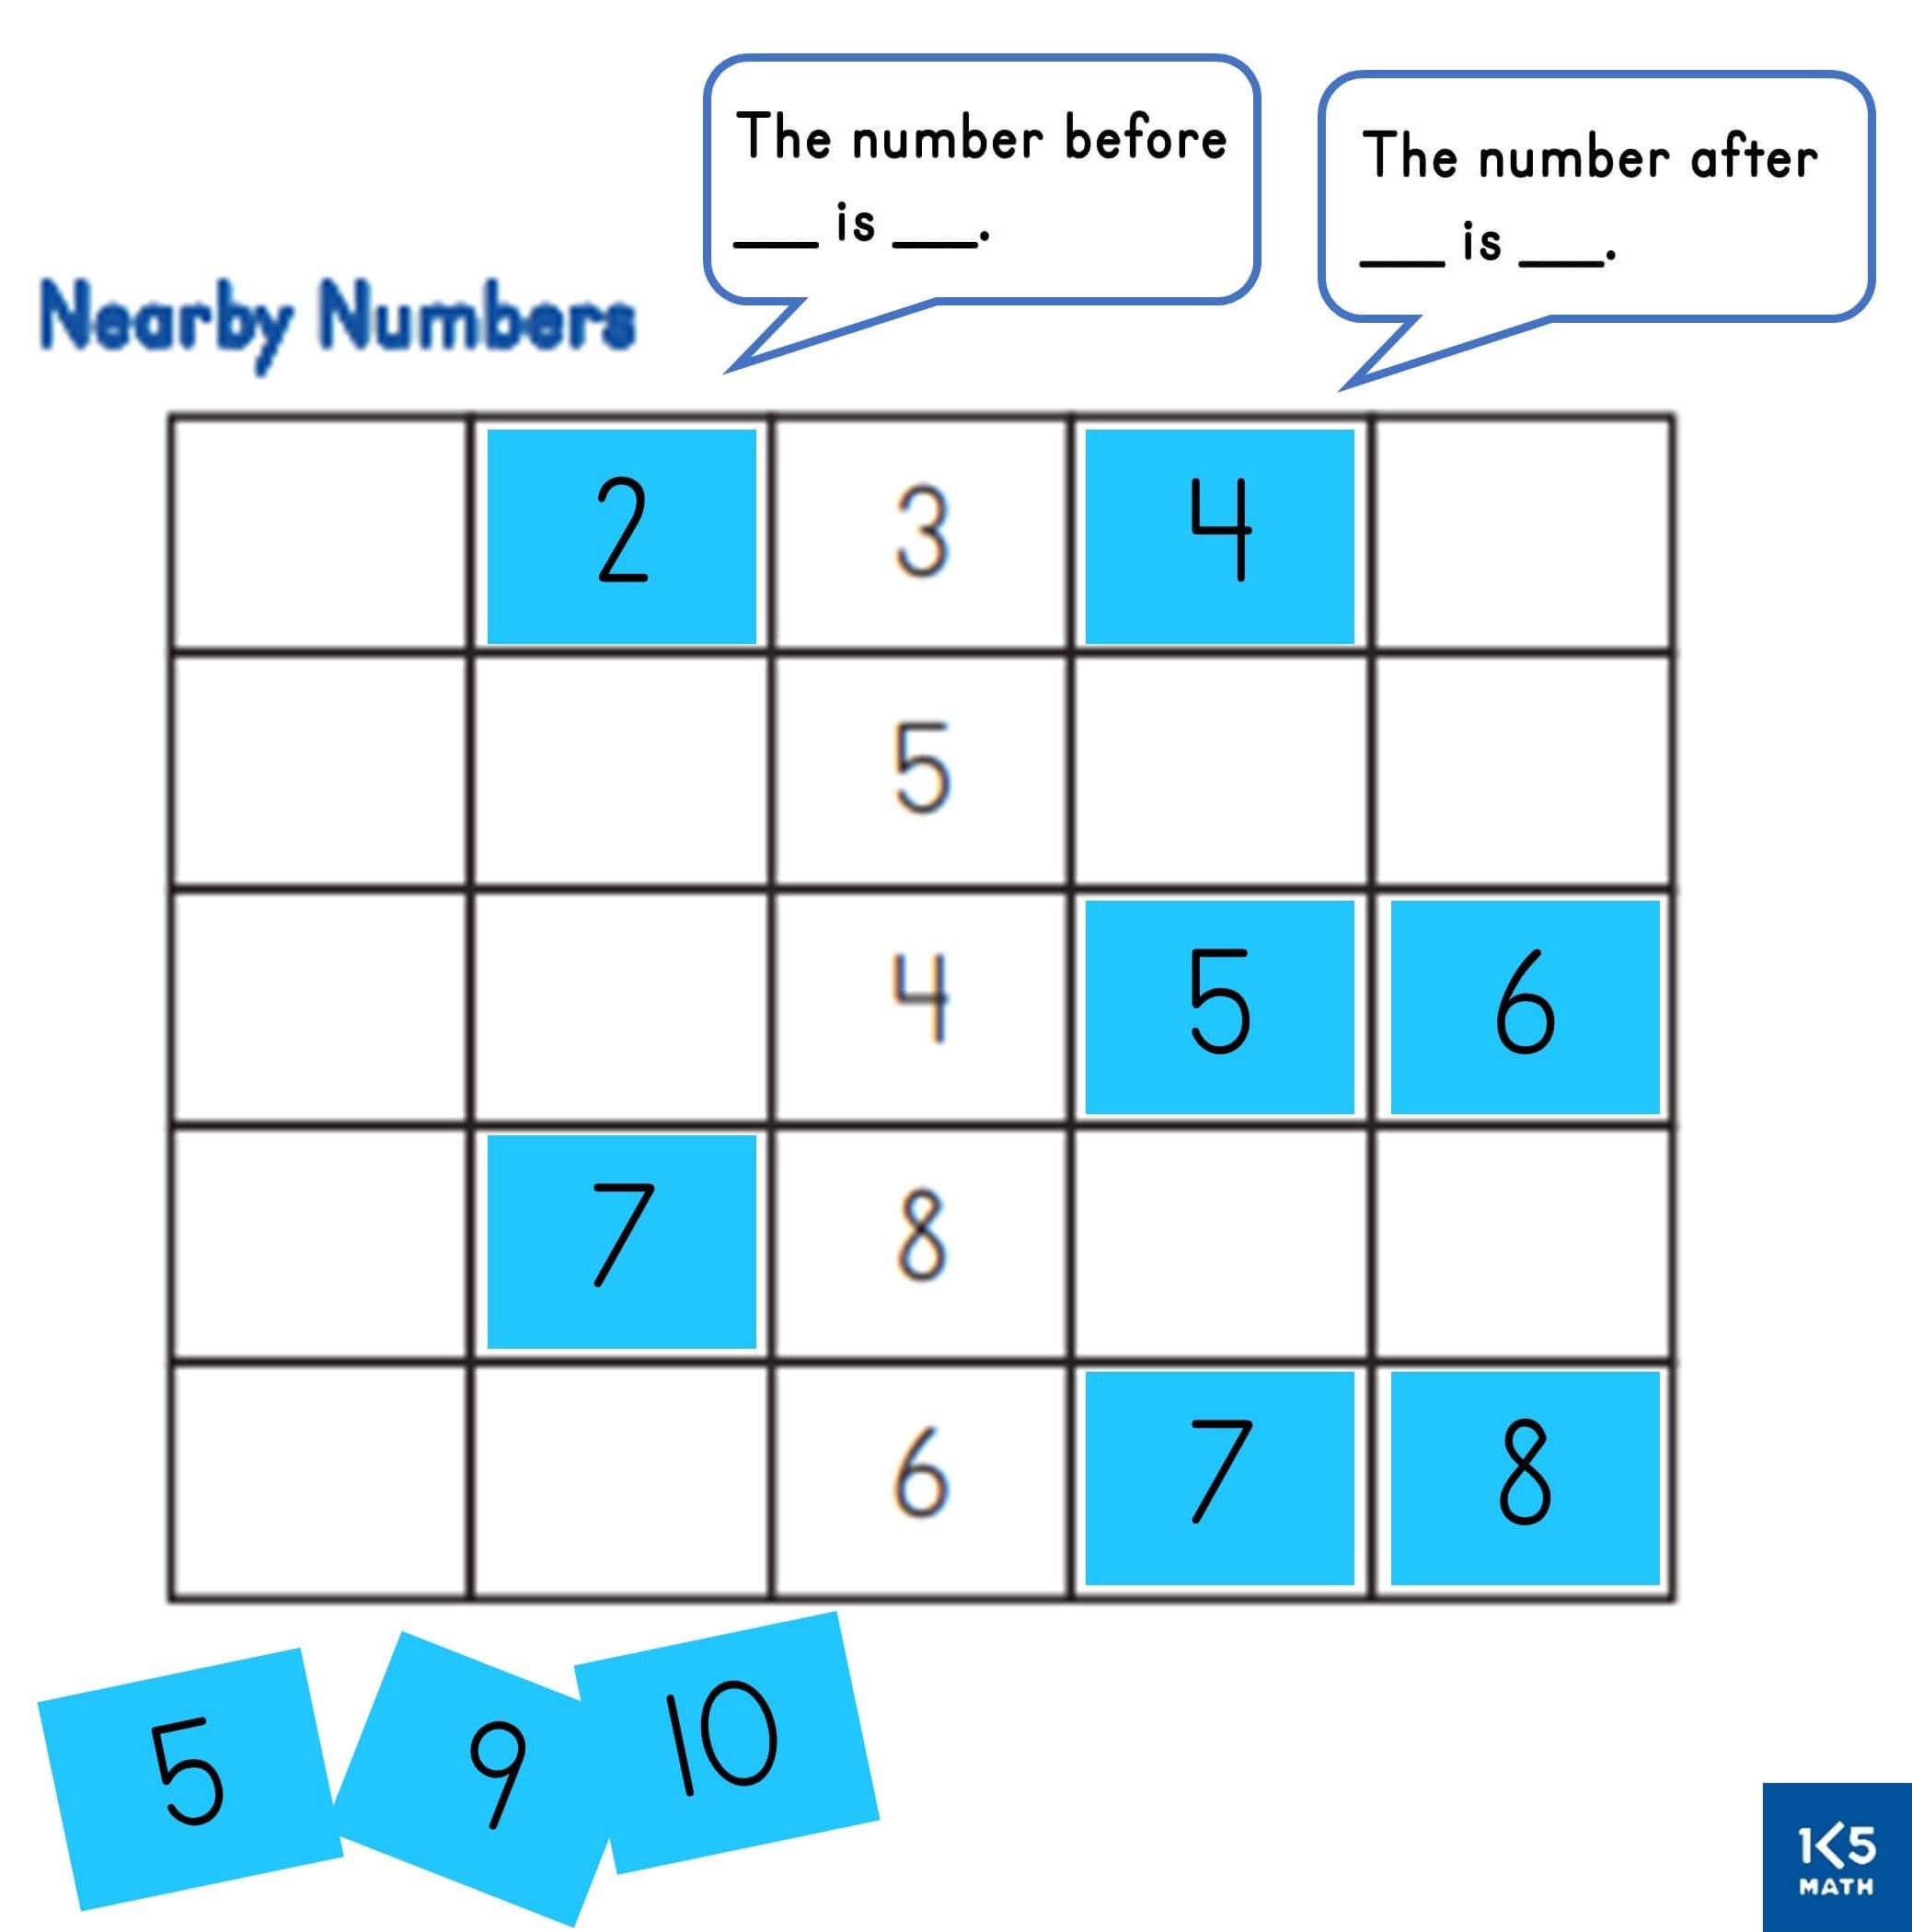 Nearby Numbers ver. 1